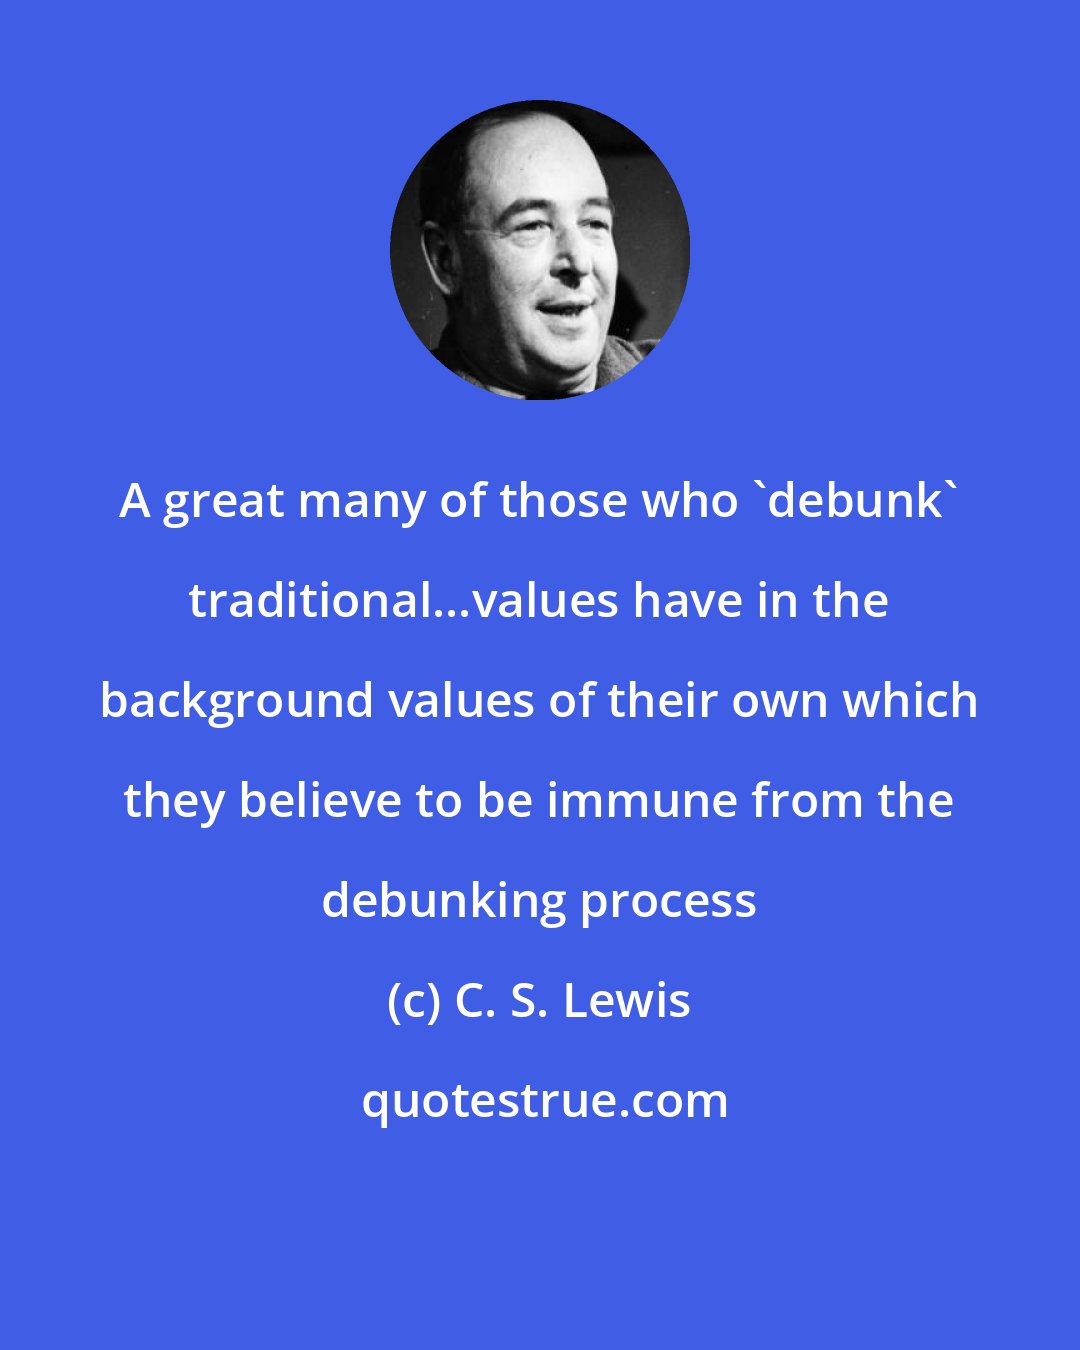 C. S. Lewis: A great many of those who 'debunk' traditional...values have in the background values of their own which they believe to be immune from the debunking process